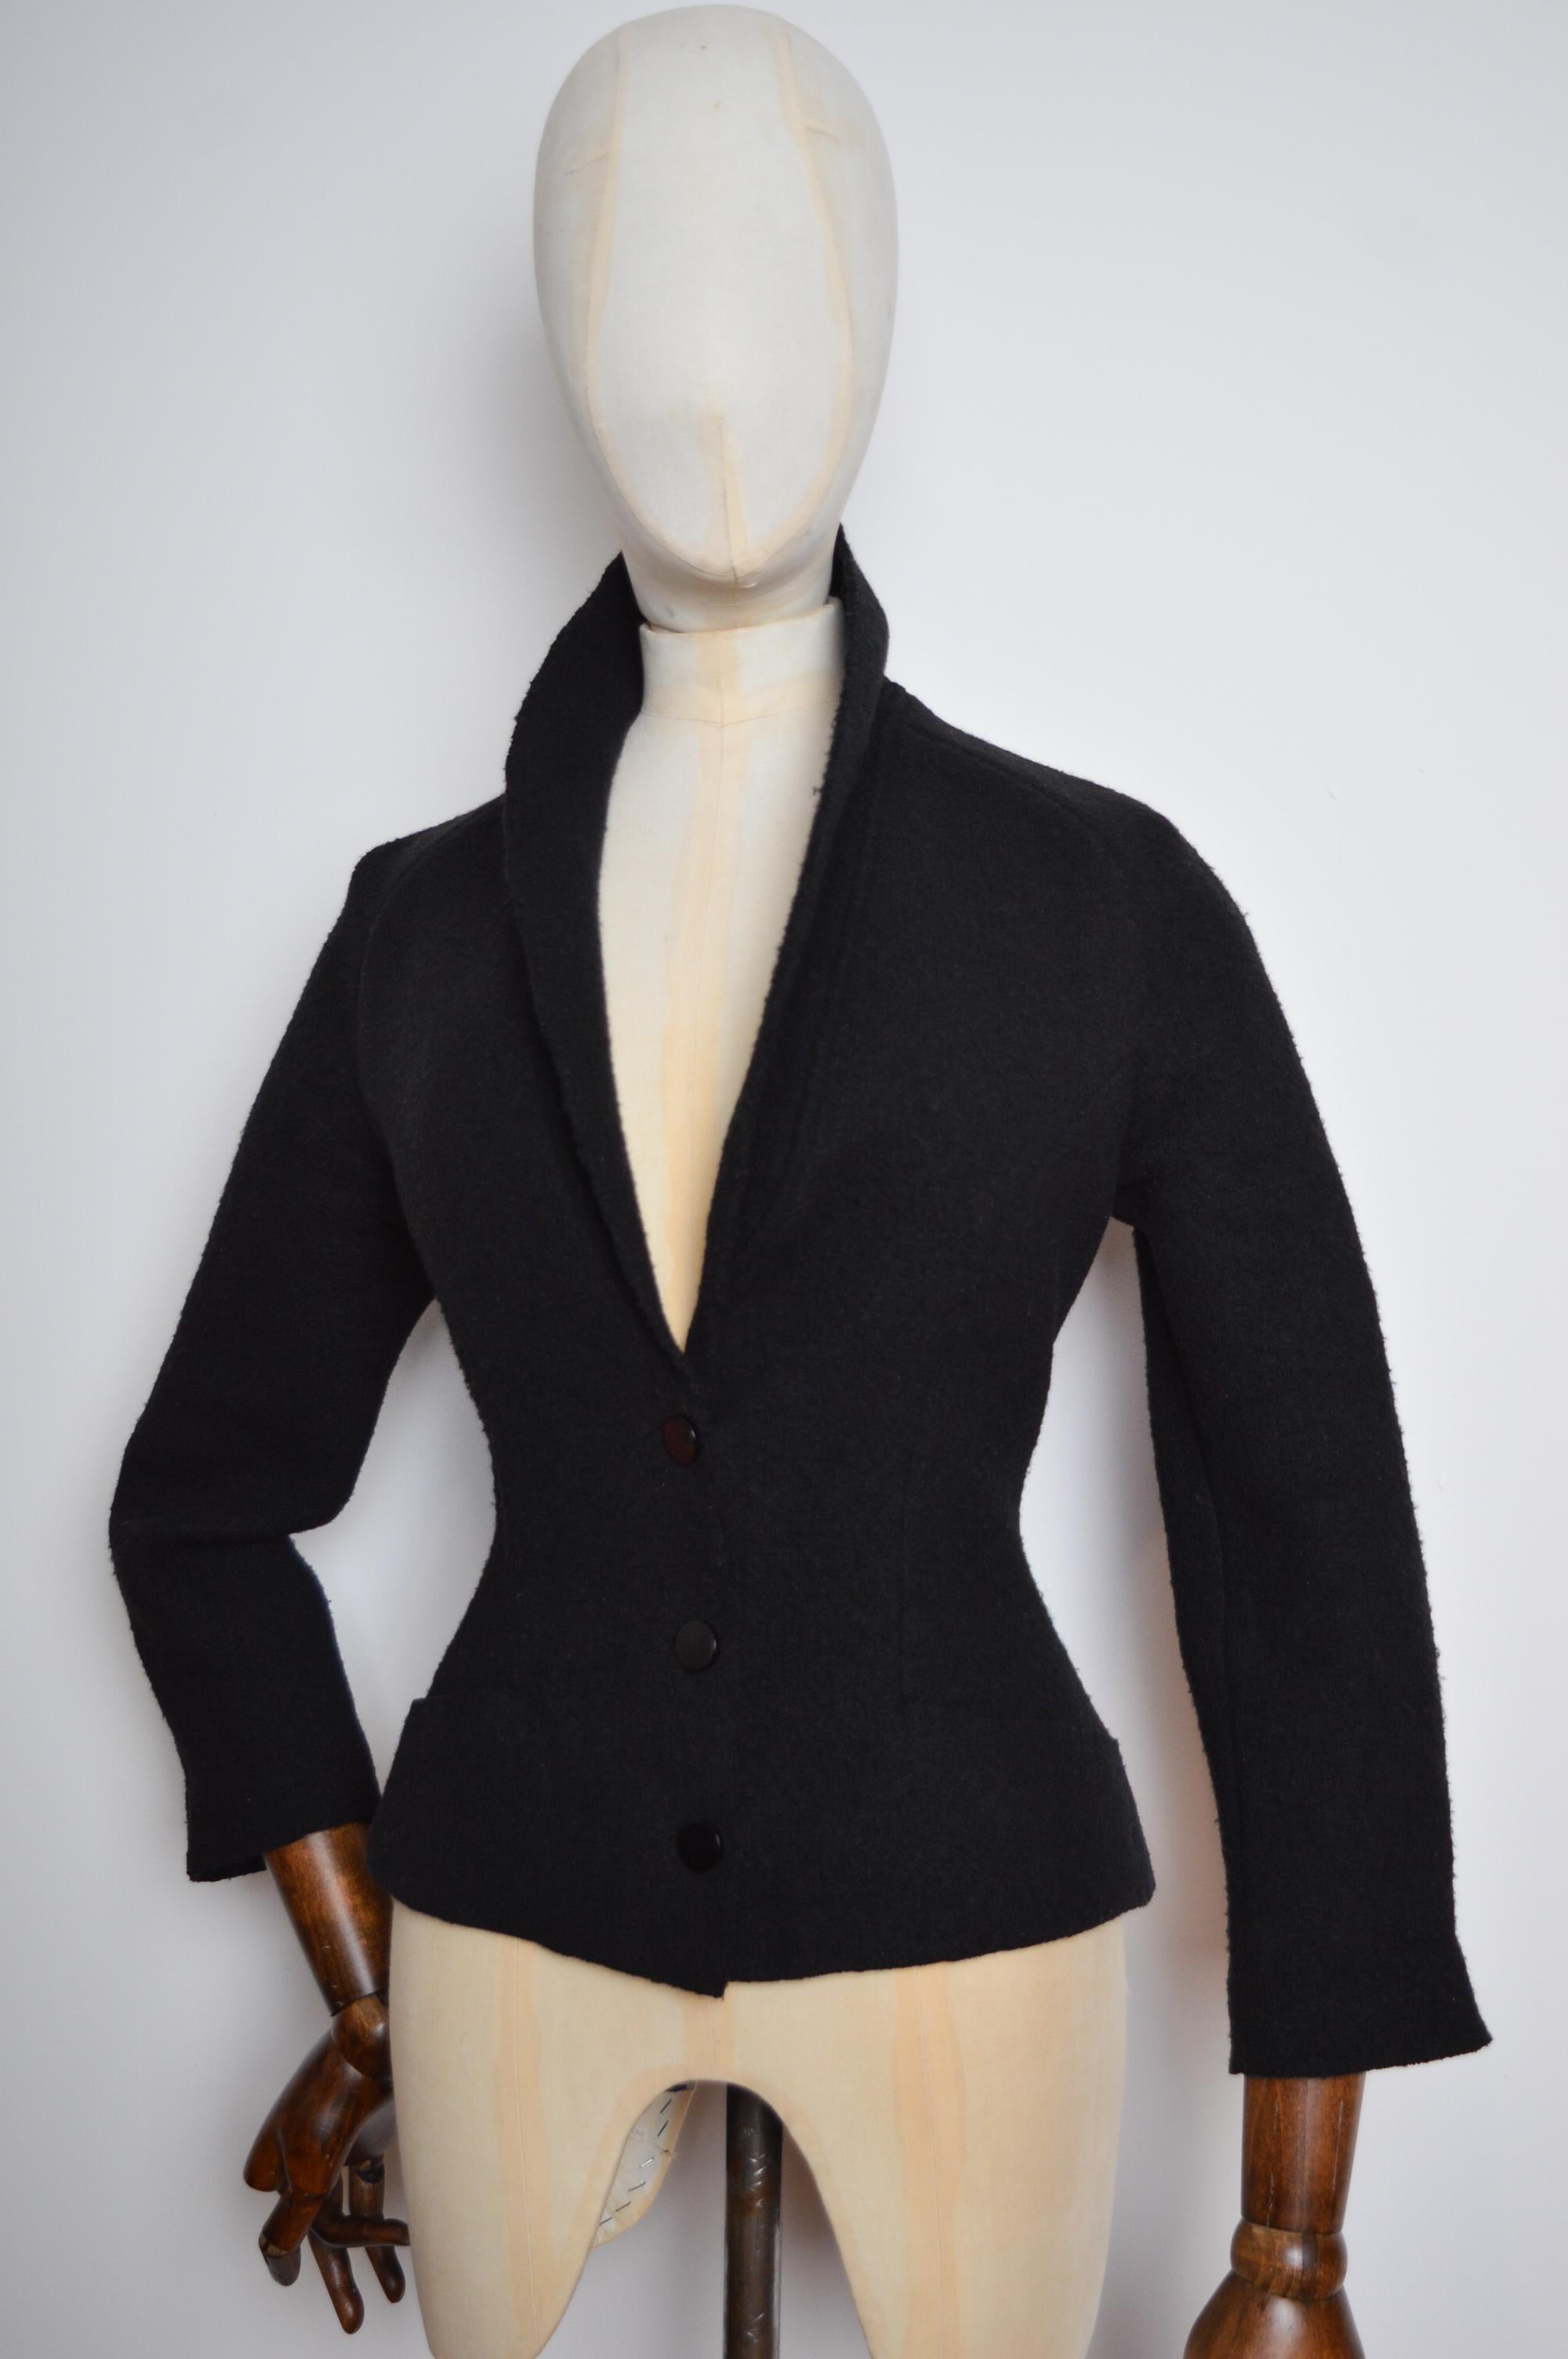 Beautiful Vintage Thierry Mugler, Black wool Knit tailored jacket.

This beautiful Blazer features a sculpted tailored fit with central line button fasten closure, hip pockets, bracelet length sleeves and a gently plunged collar line.

MADE IN ITALY